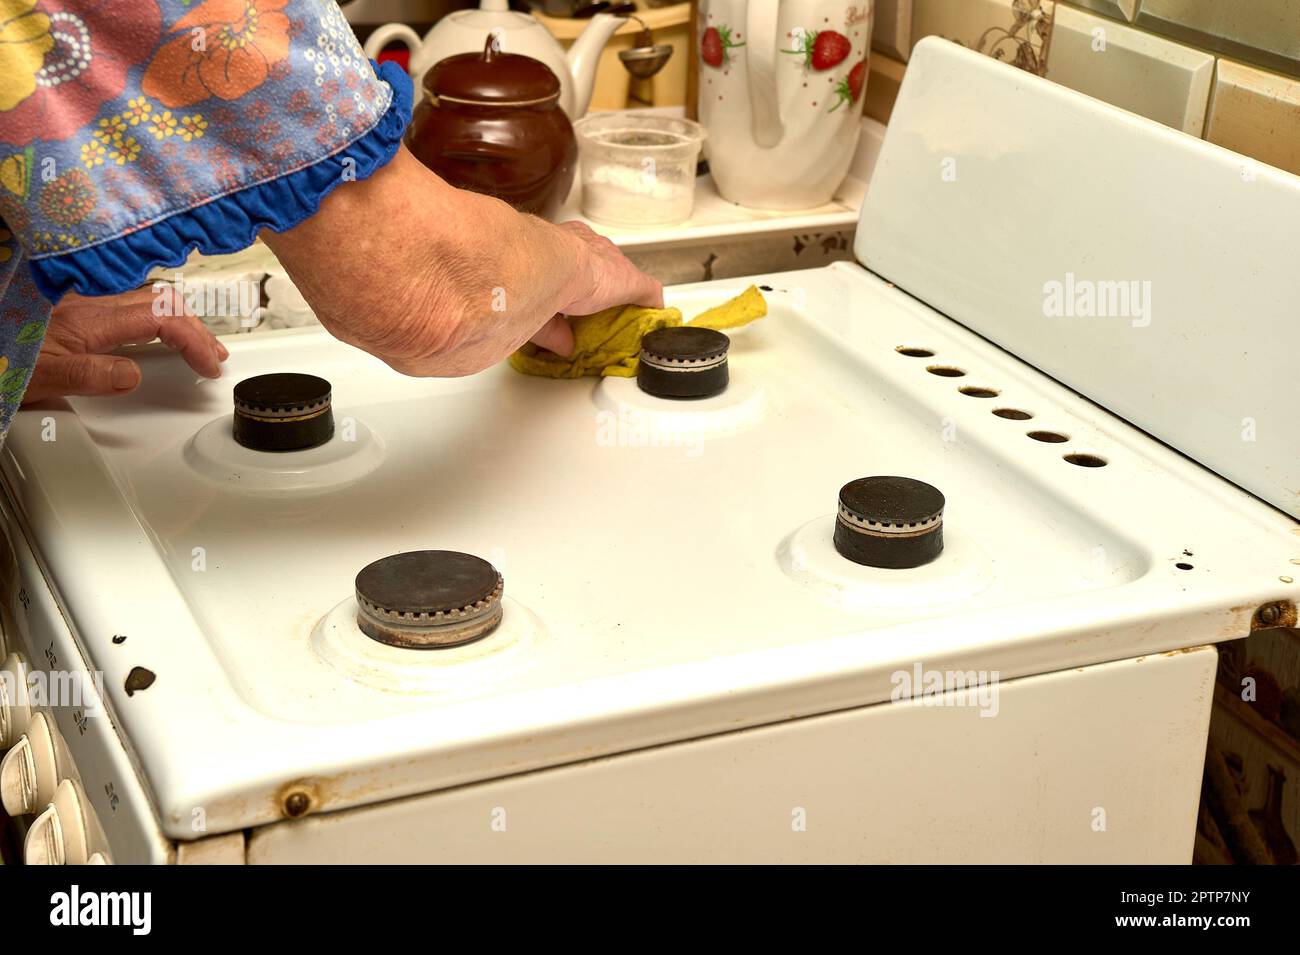 How to Clean a Gas Stovetop - This Old House